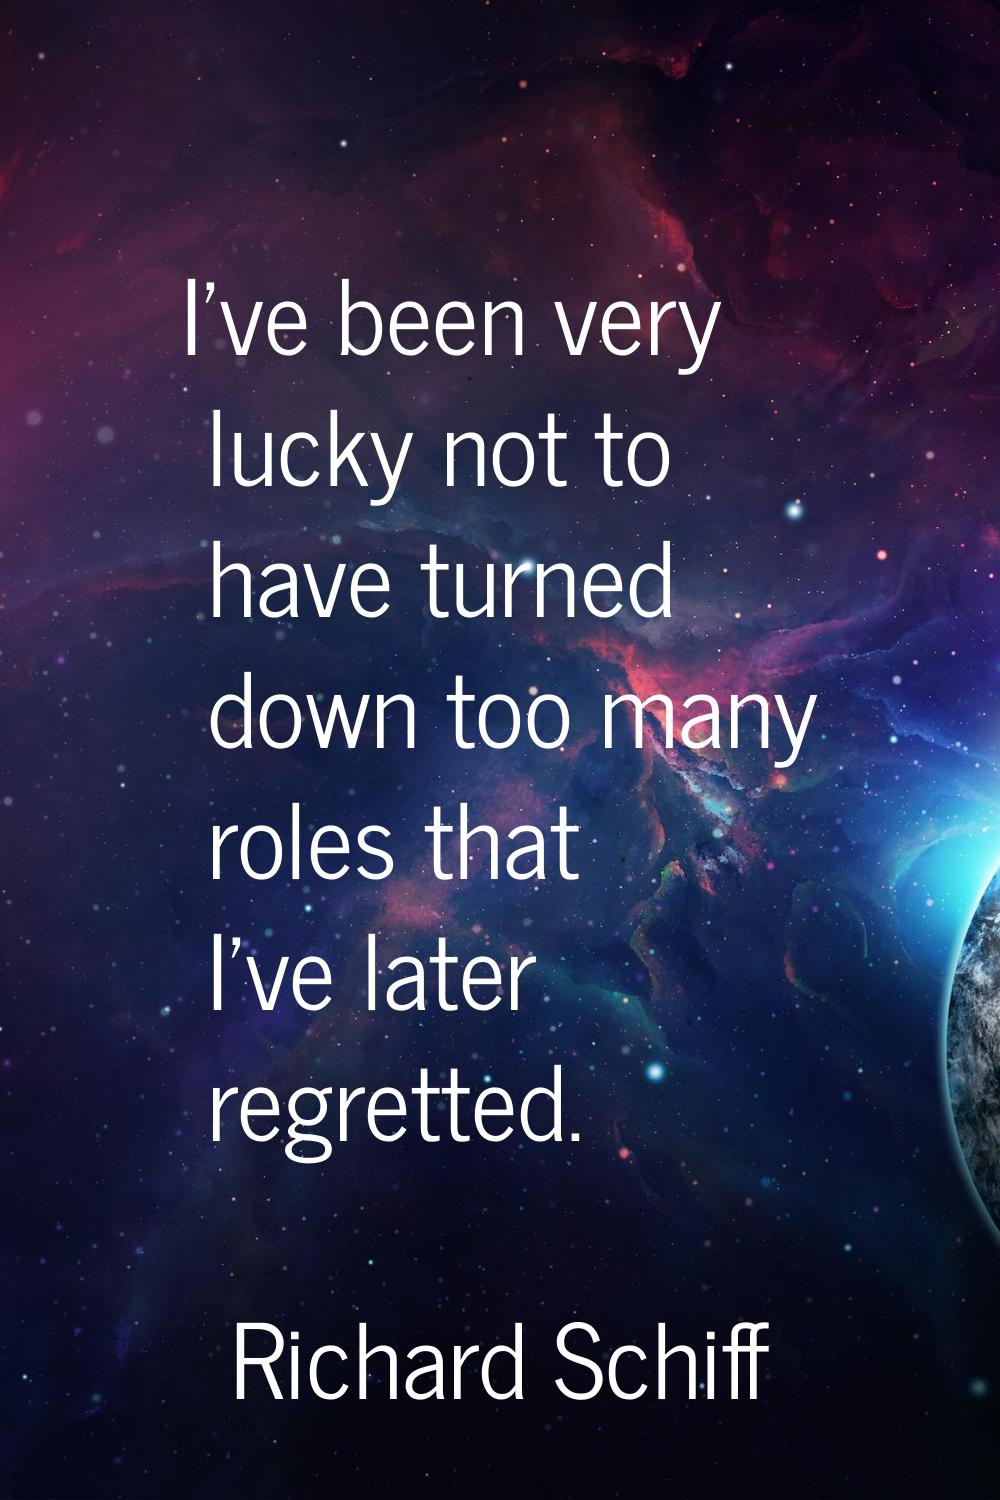 I've been very lucky not to have turned down too many roles that I've later regretted.